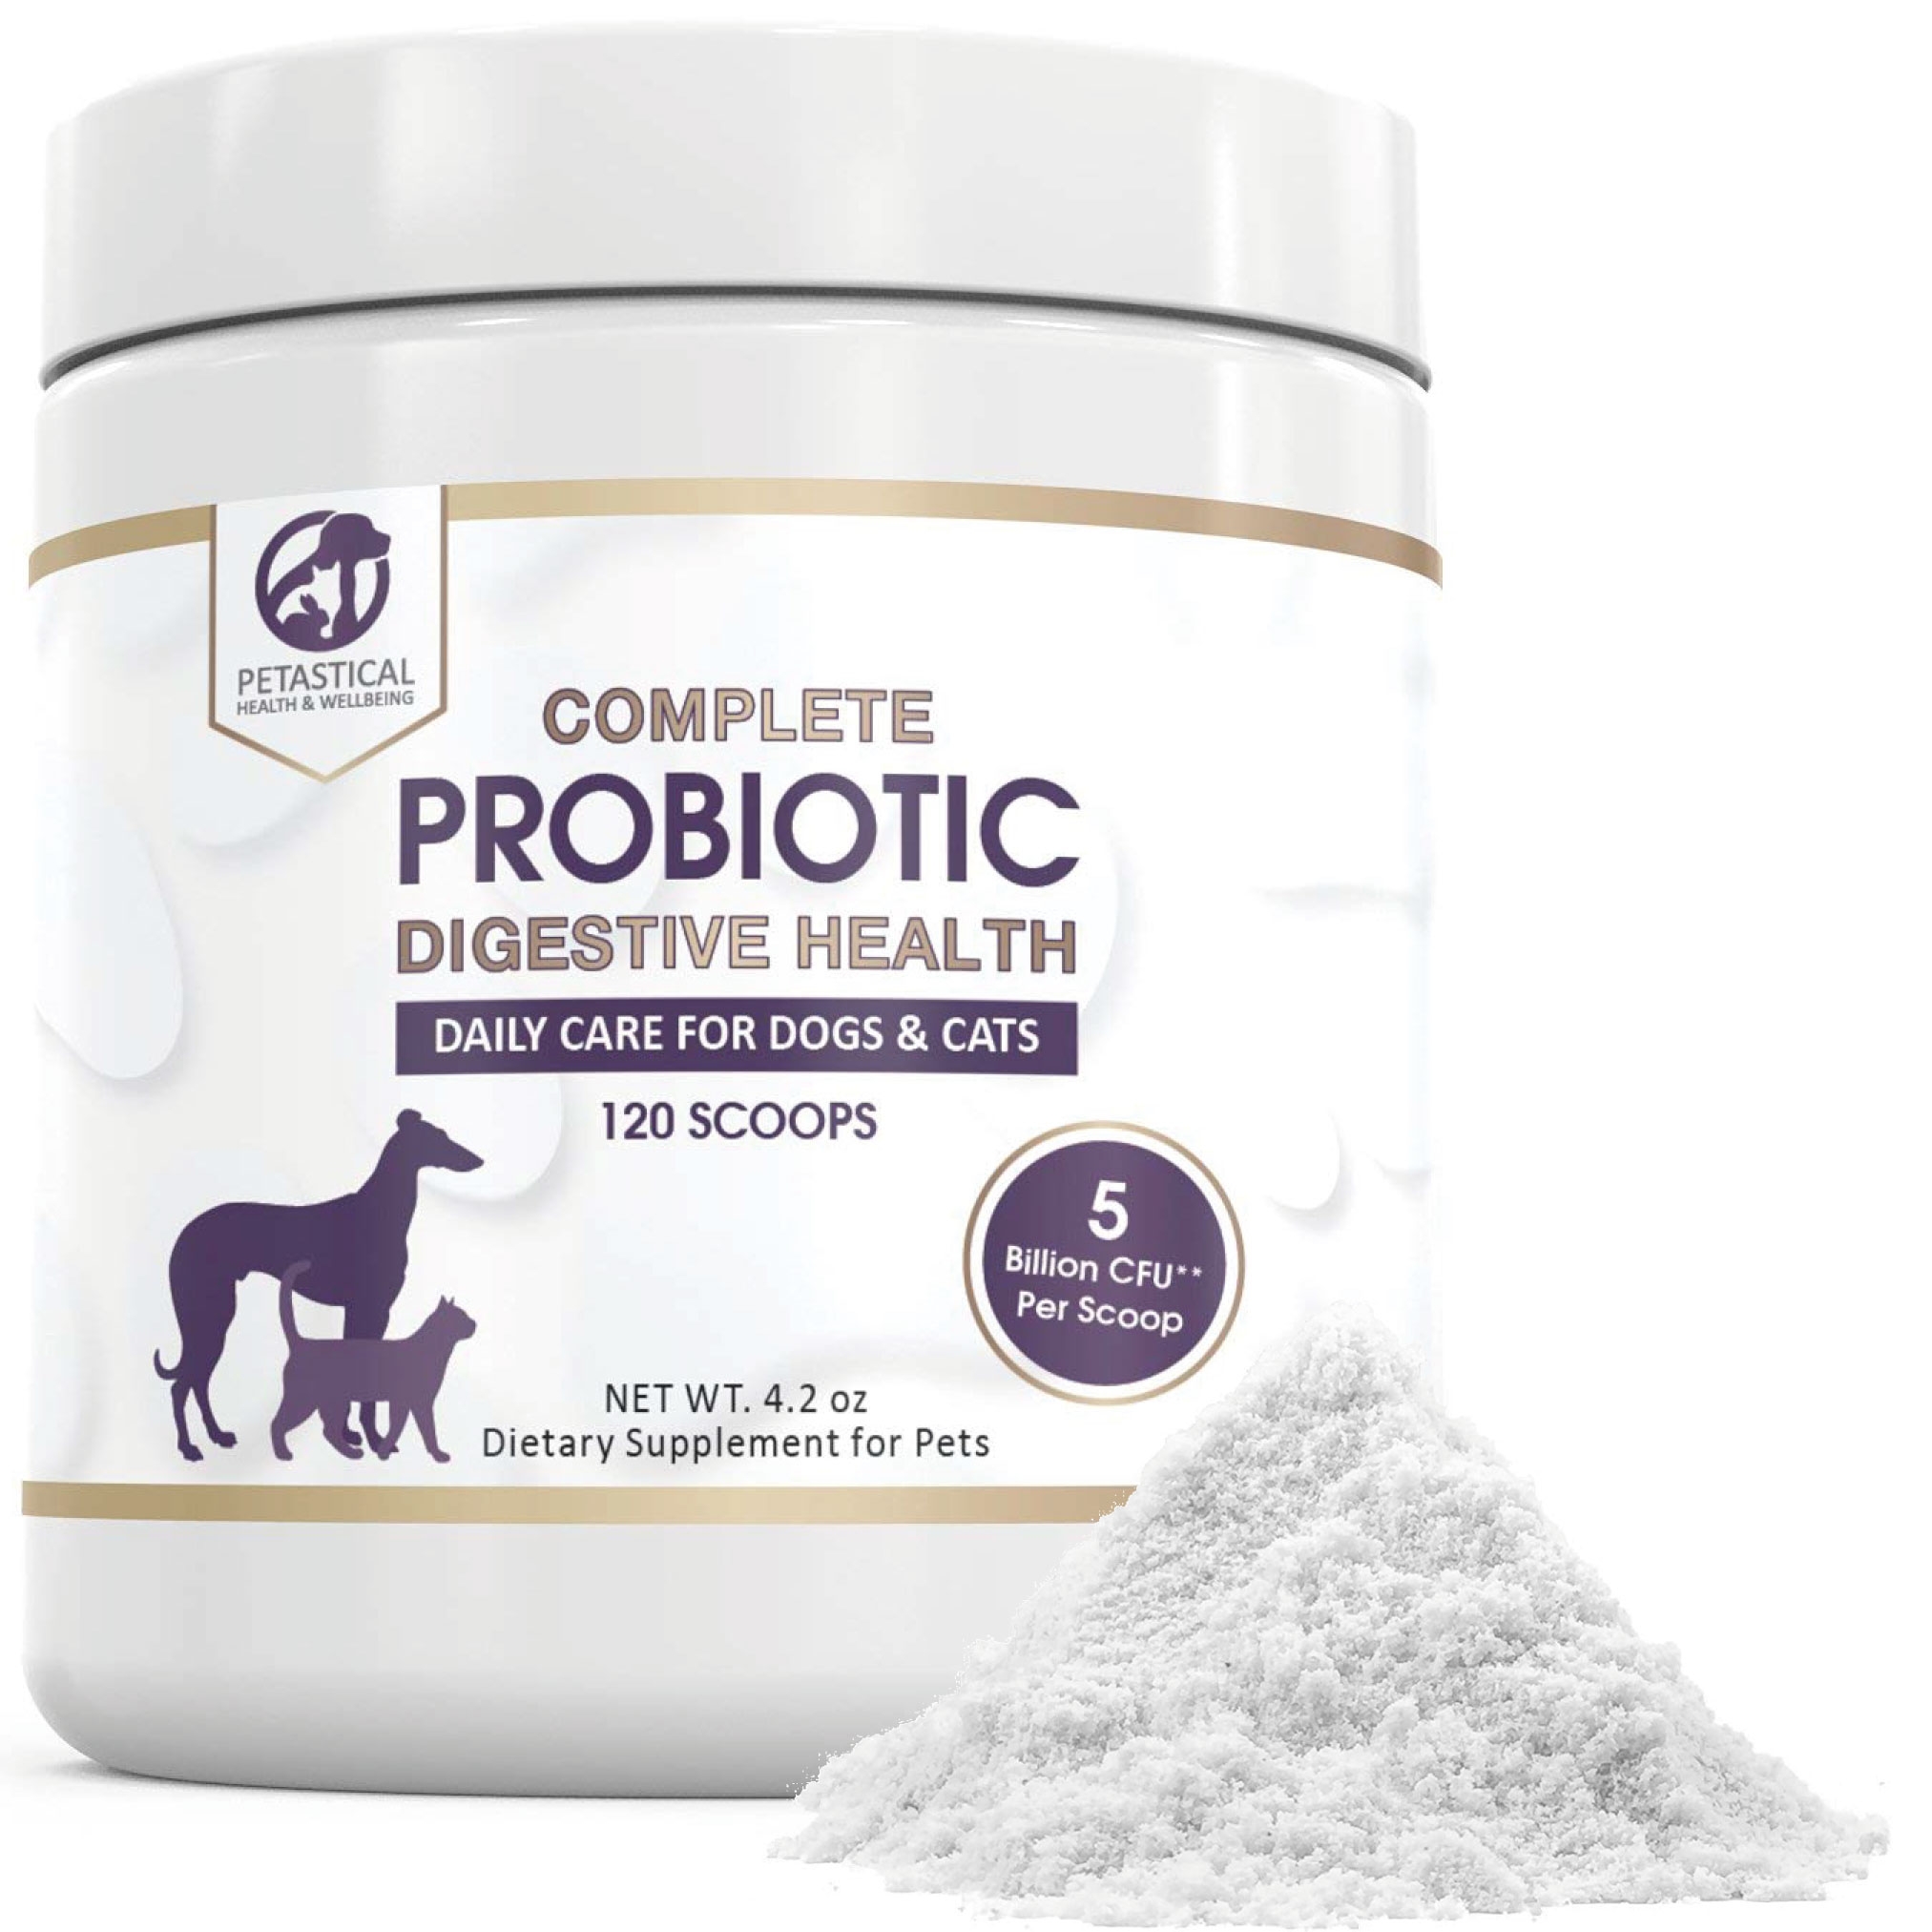 Petastical Probiotic Powder for Dogs and Cats (120 Scoop)